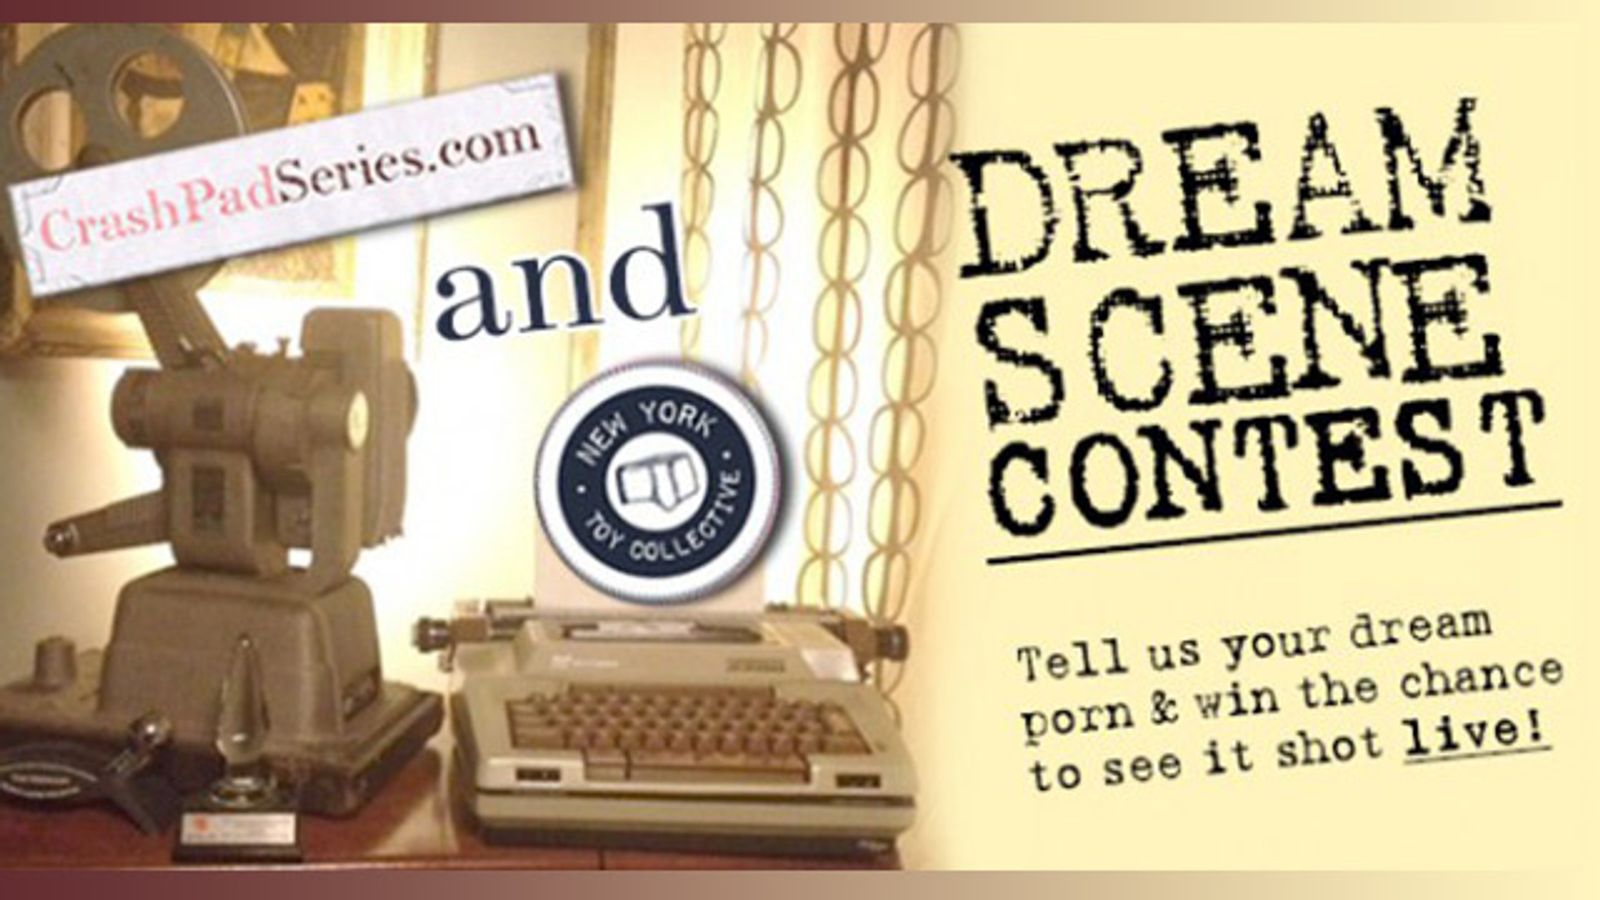 NY Toy Collective, CrashPadSeries Host "Dream Scene" Contest